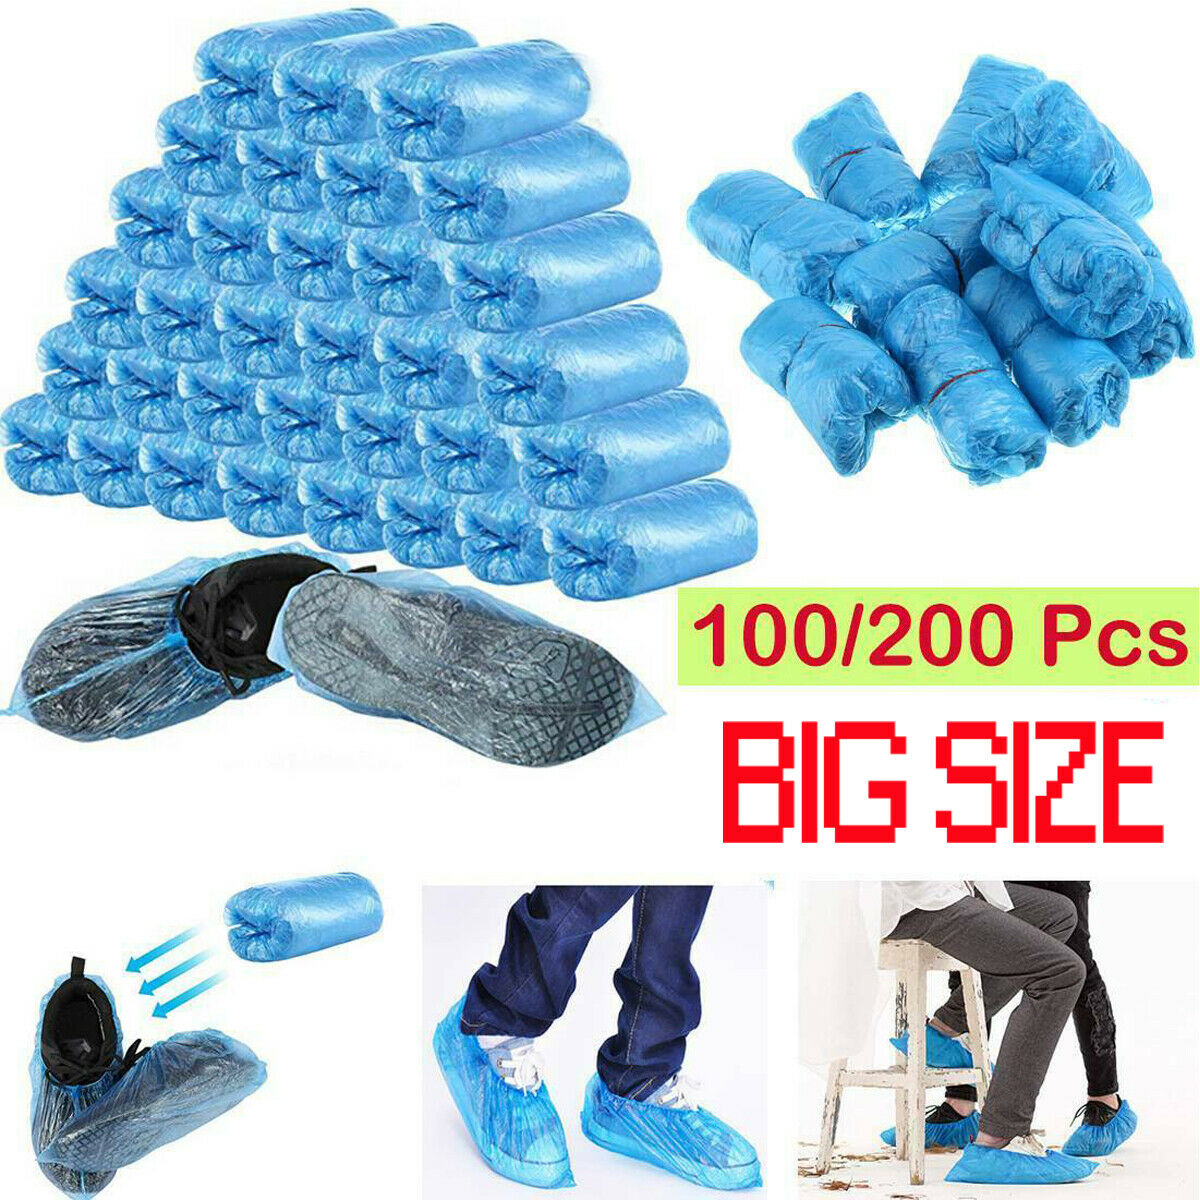 100 PCS Waterproof Boot Covers Disposable Shoe Cover Big Size Protect Overshoes